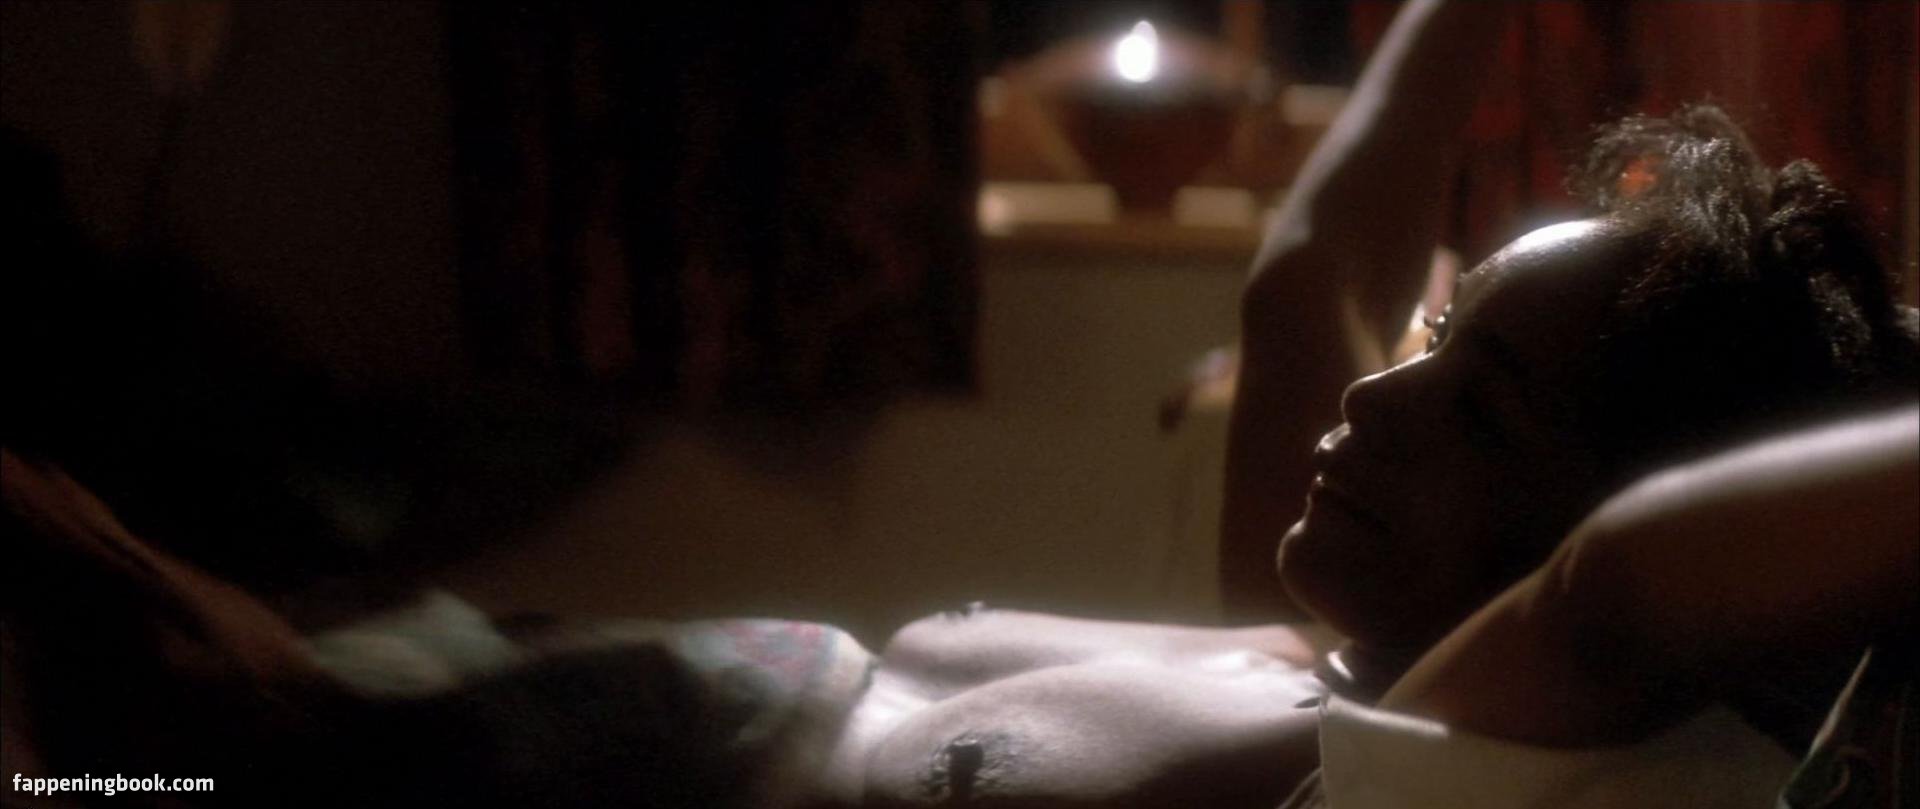 Angela Bassett Nude, The Fappening - Photo #35098 - FappeningBook.